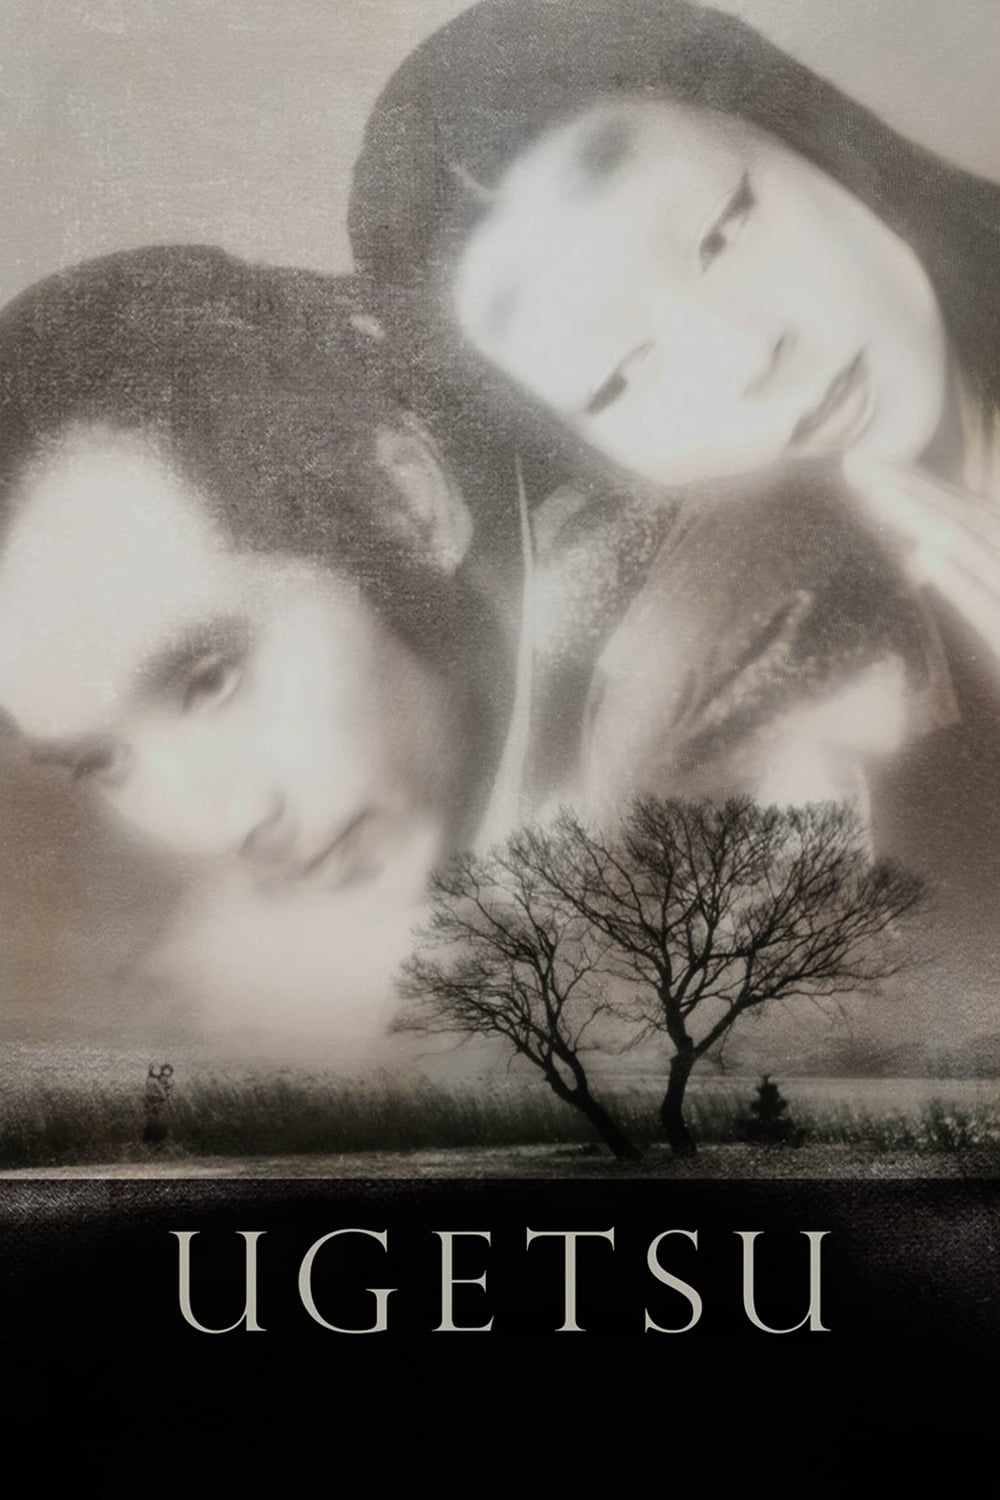 Ugetsu Picture